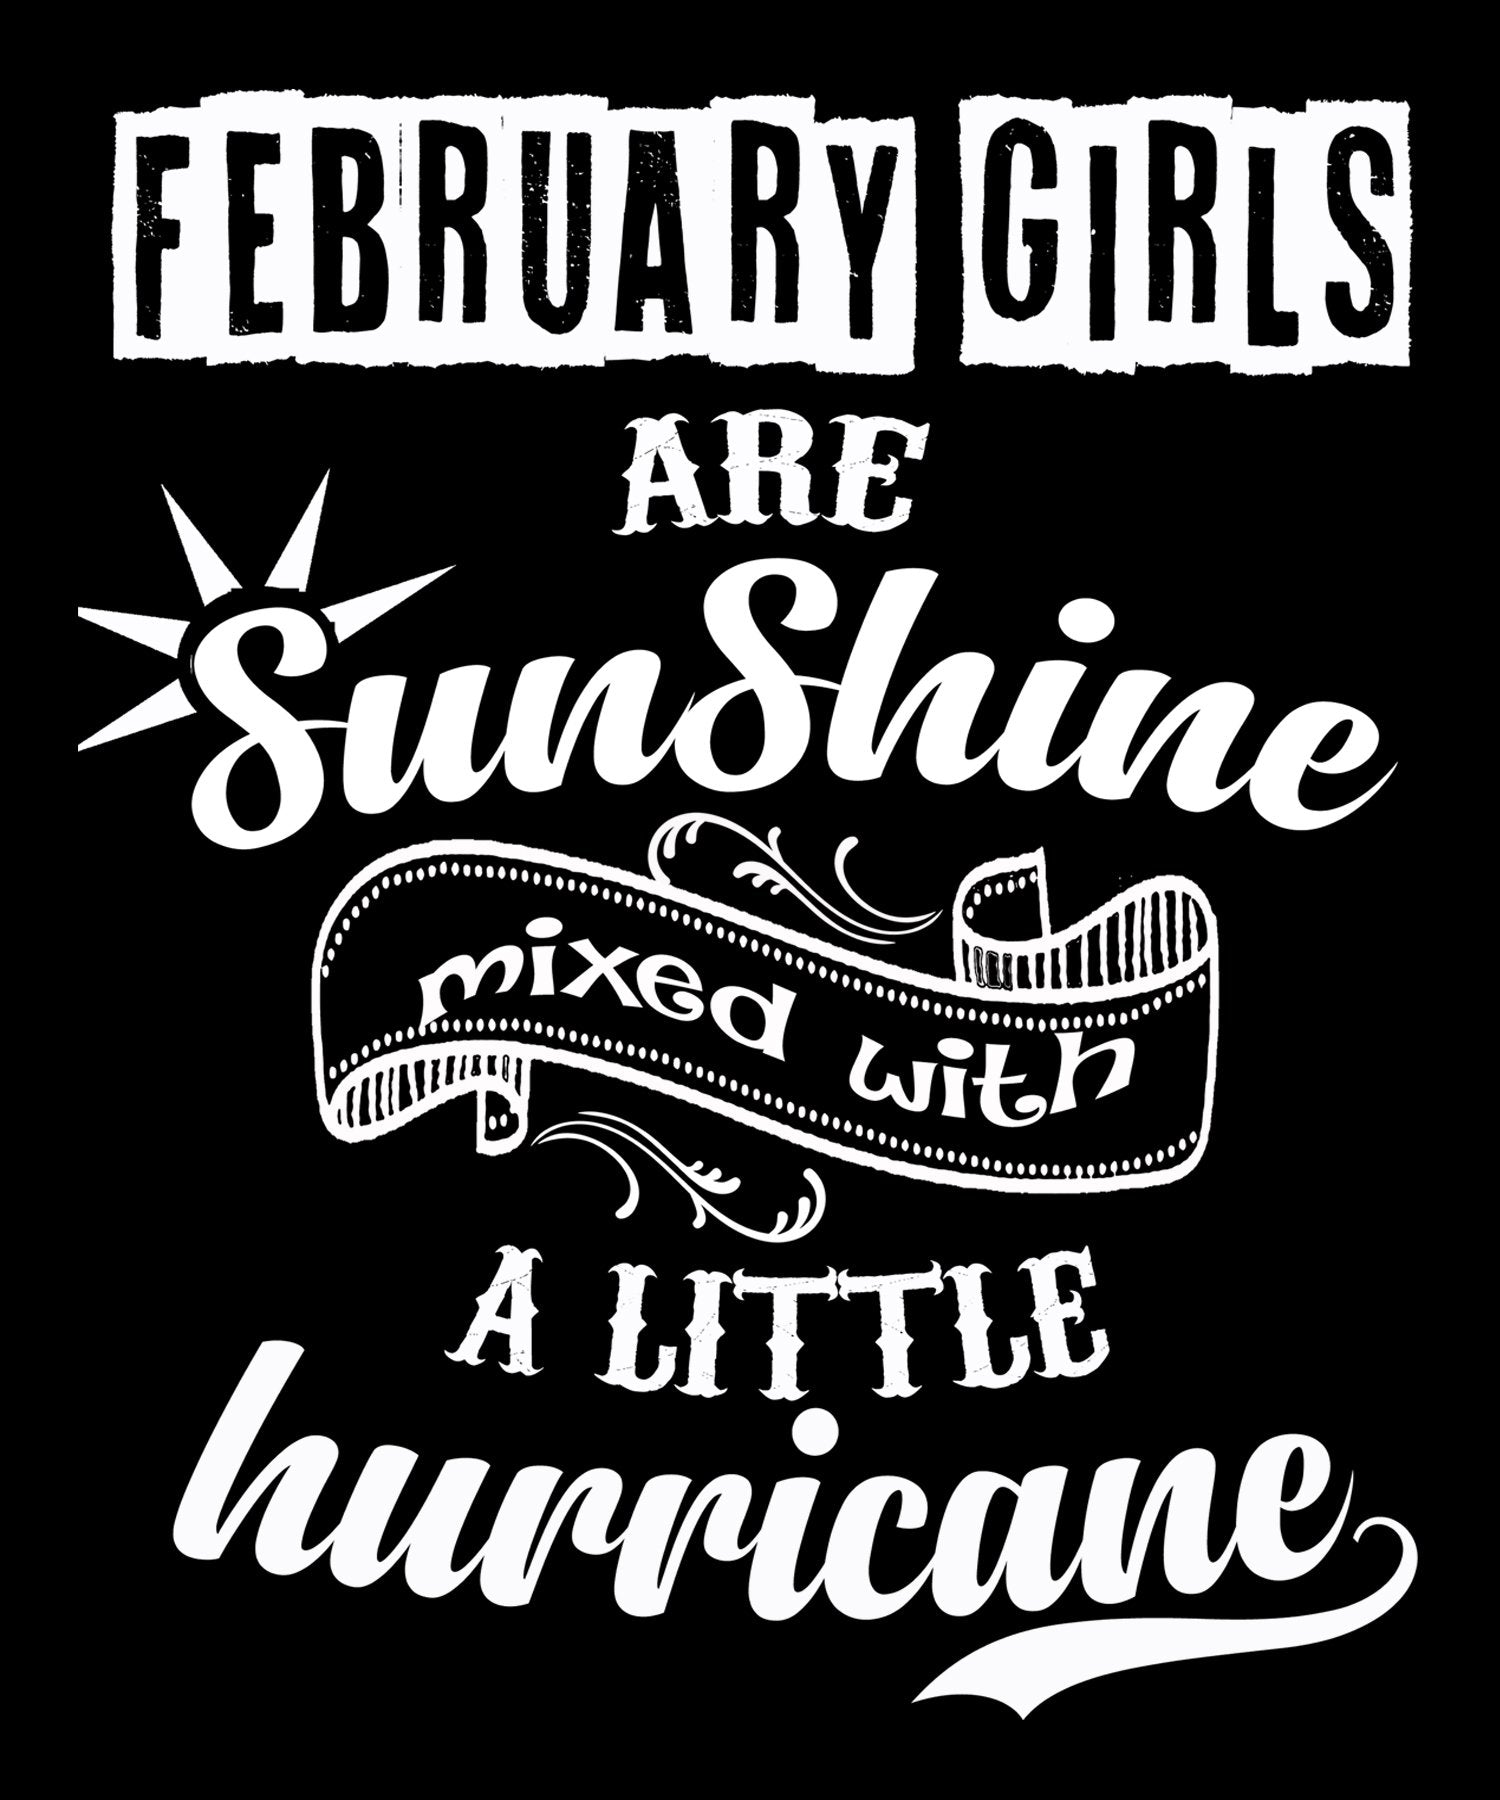 "February Girls Are Sunshine Mixed With Hurricane" Buy All Colors.